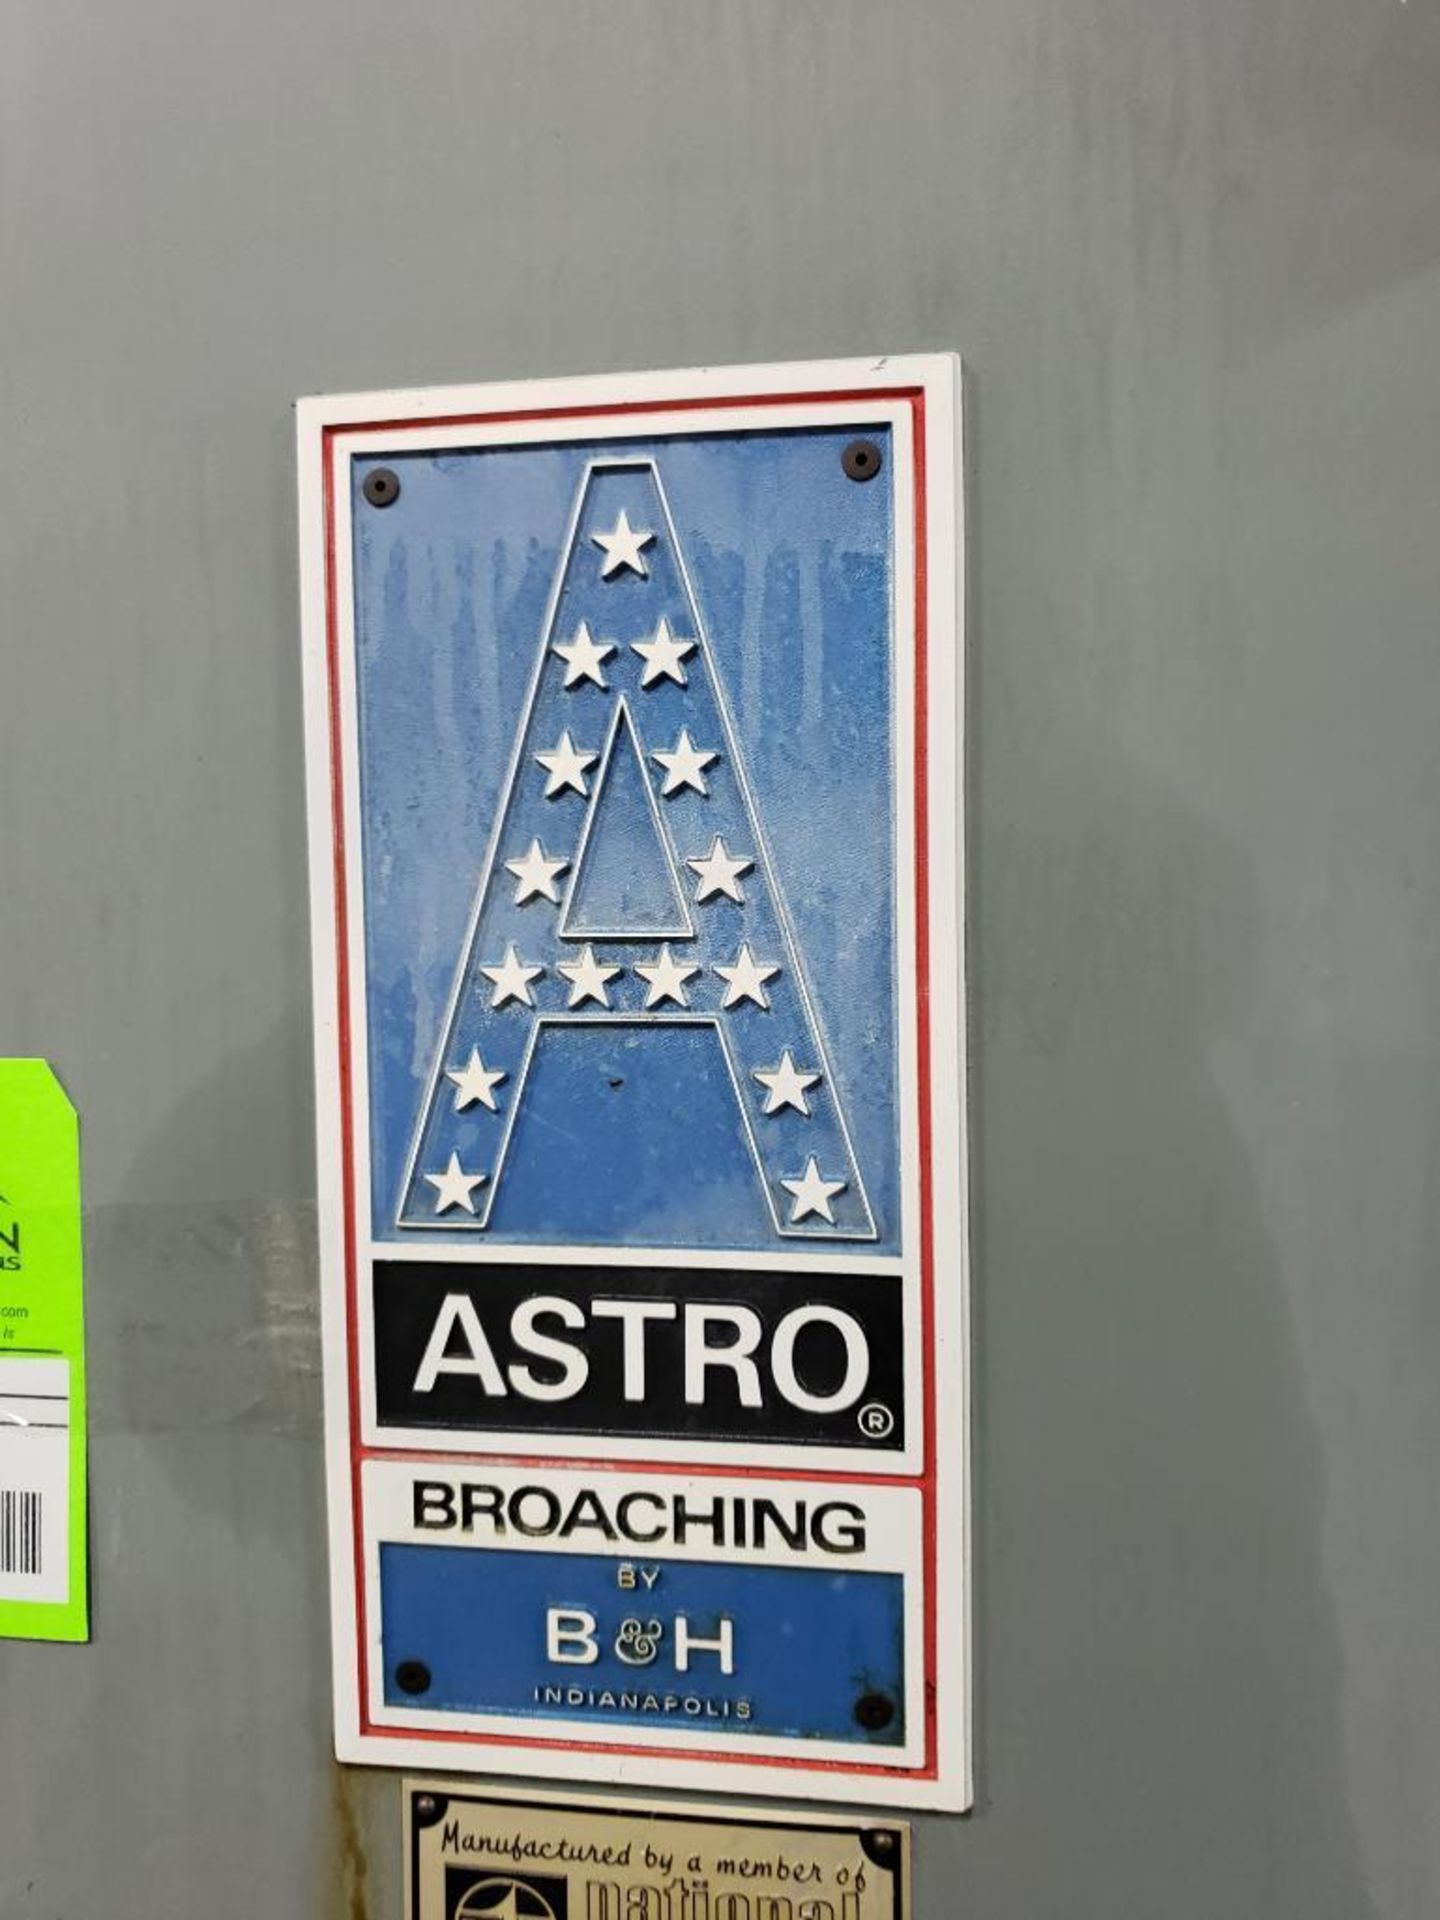 B & H Tool & Machine Corp. ABV-24-8-70. Astro Broaching by B&H Indianapolis. 440V, 3PH, 80-gallon. - Image 3 of 34